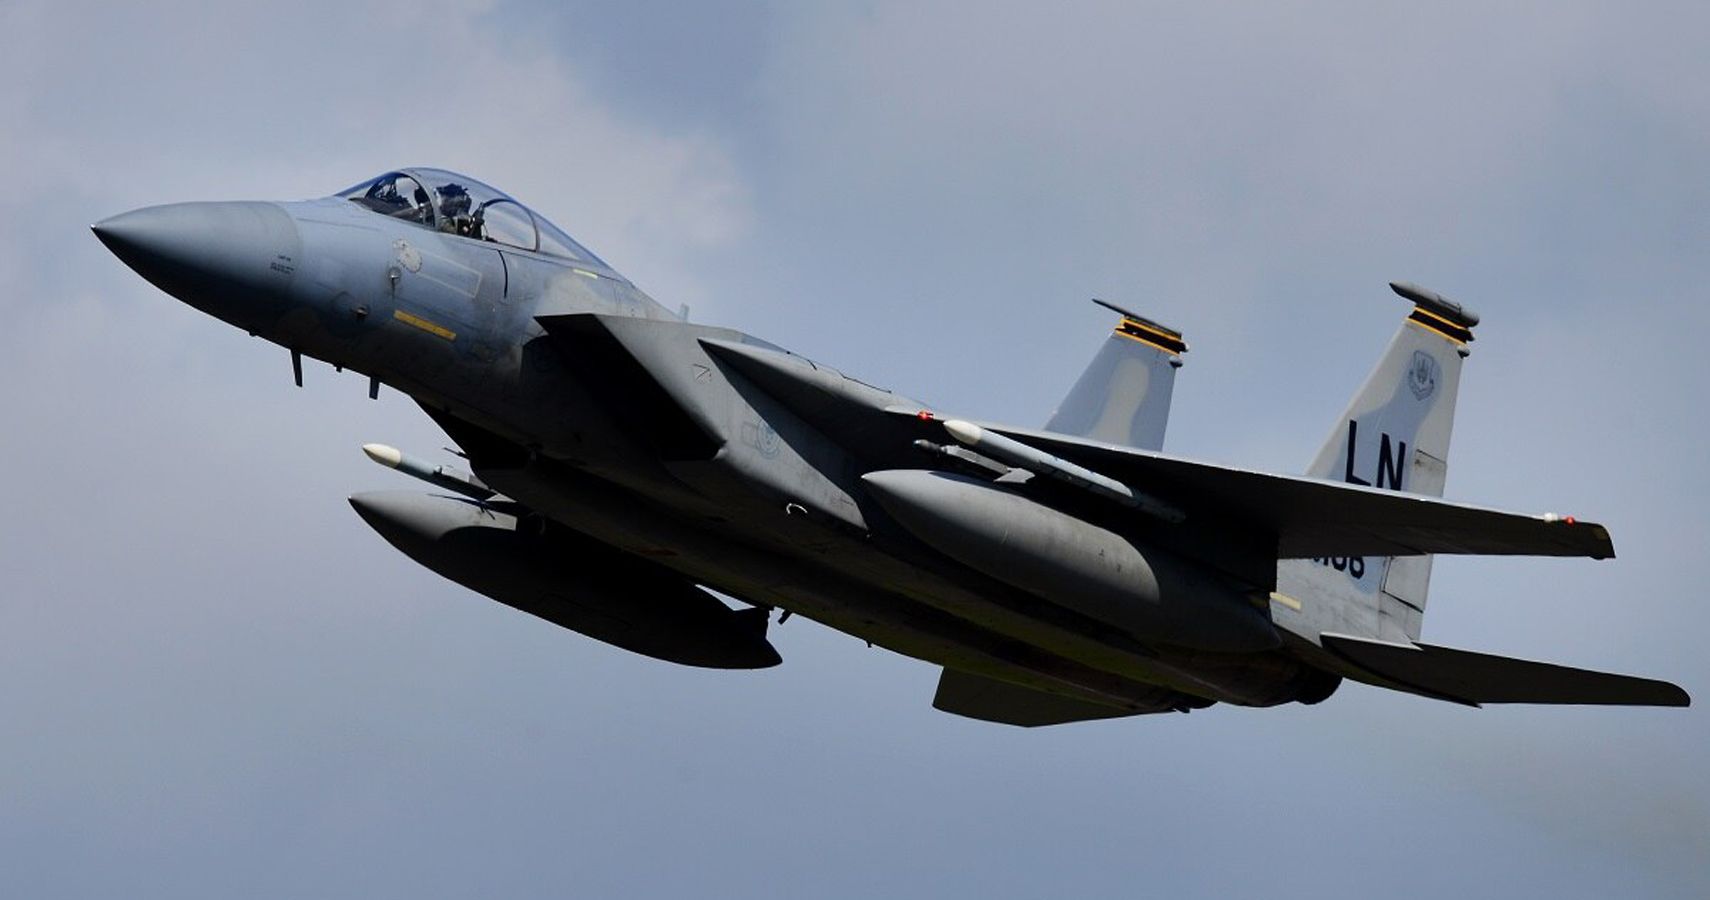 US Air Force F-15C Eagle fighter aircraft in flight